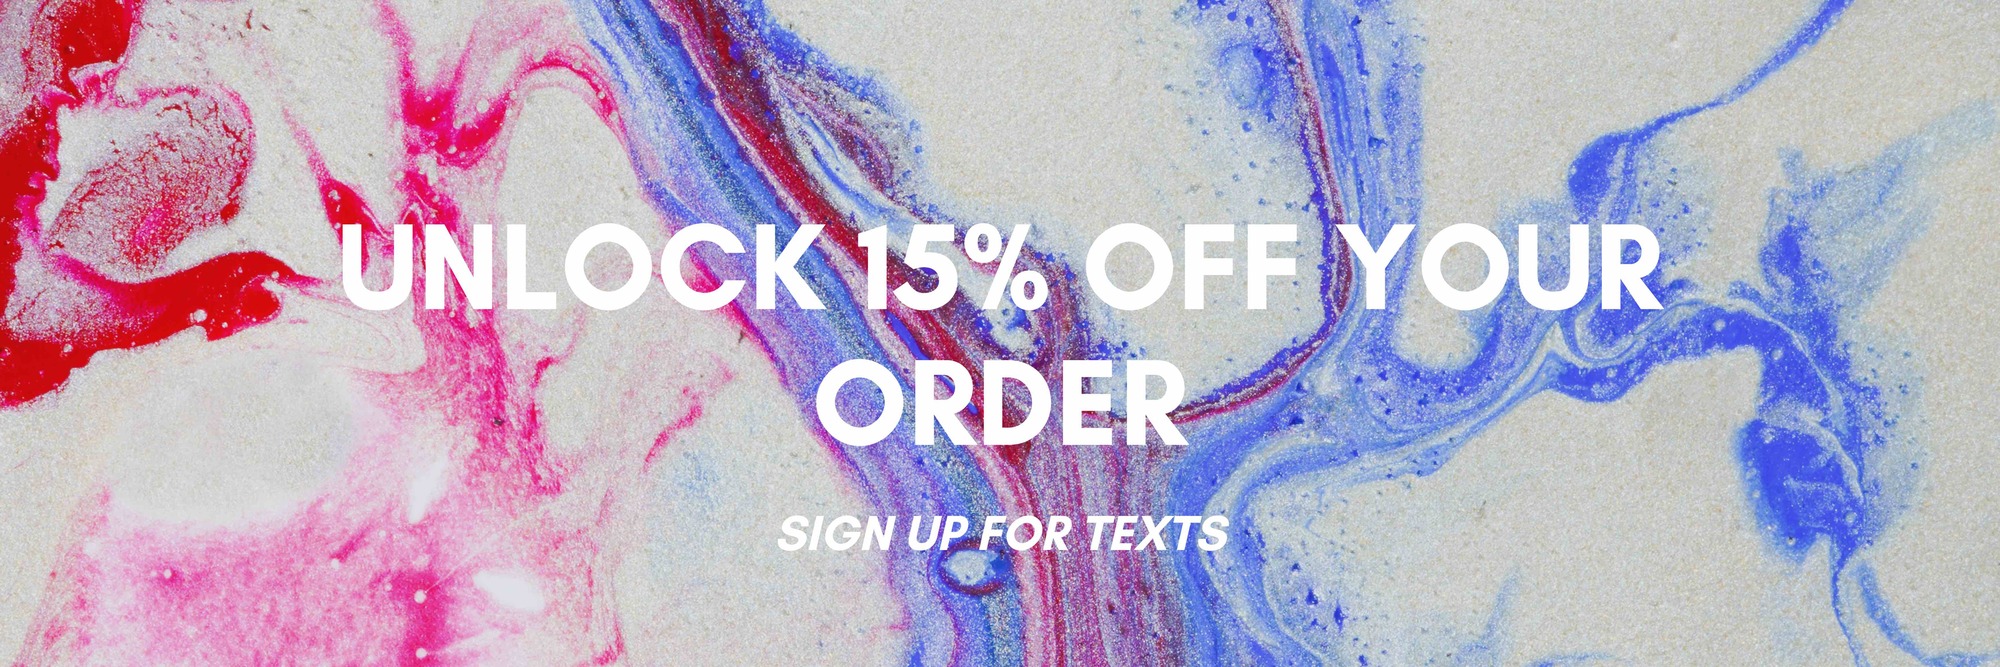 Sign Up for Texts to get 15% Off your Order